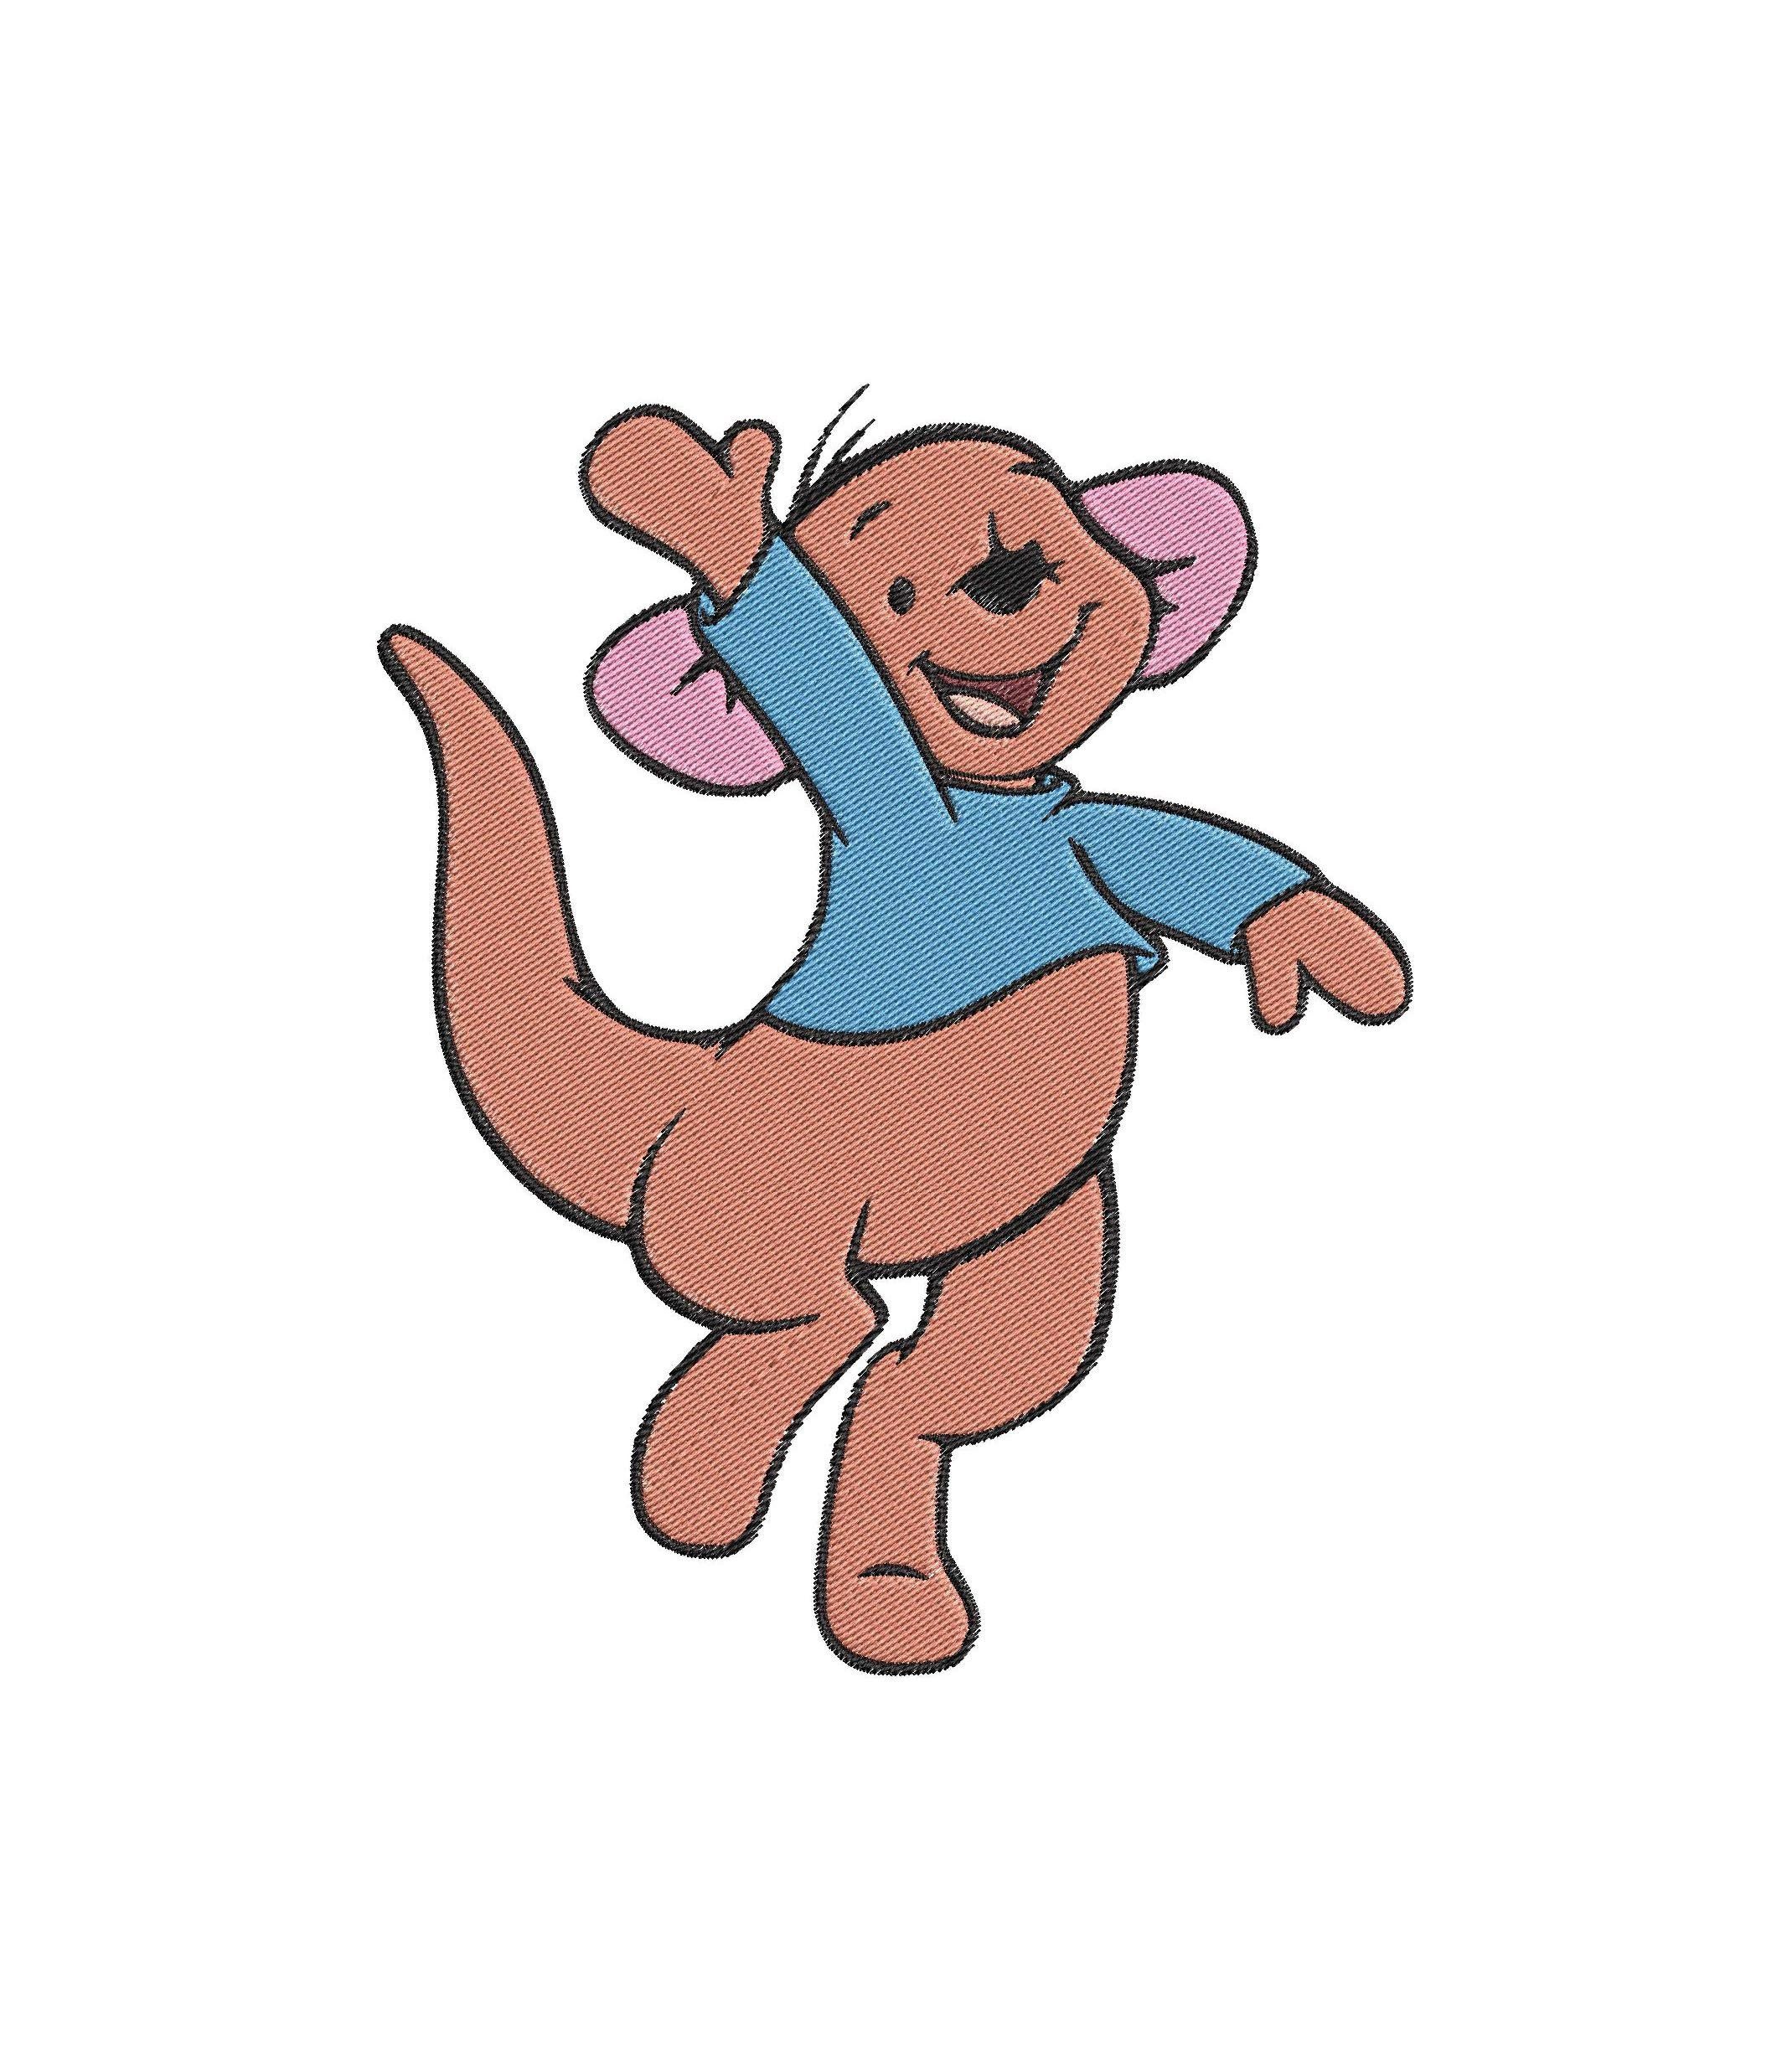 Baby Roo, Winnie-the-Pooh animation, Fill embroidery design, Winnie the Pooh drawing, 2140x2460 HD Phone